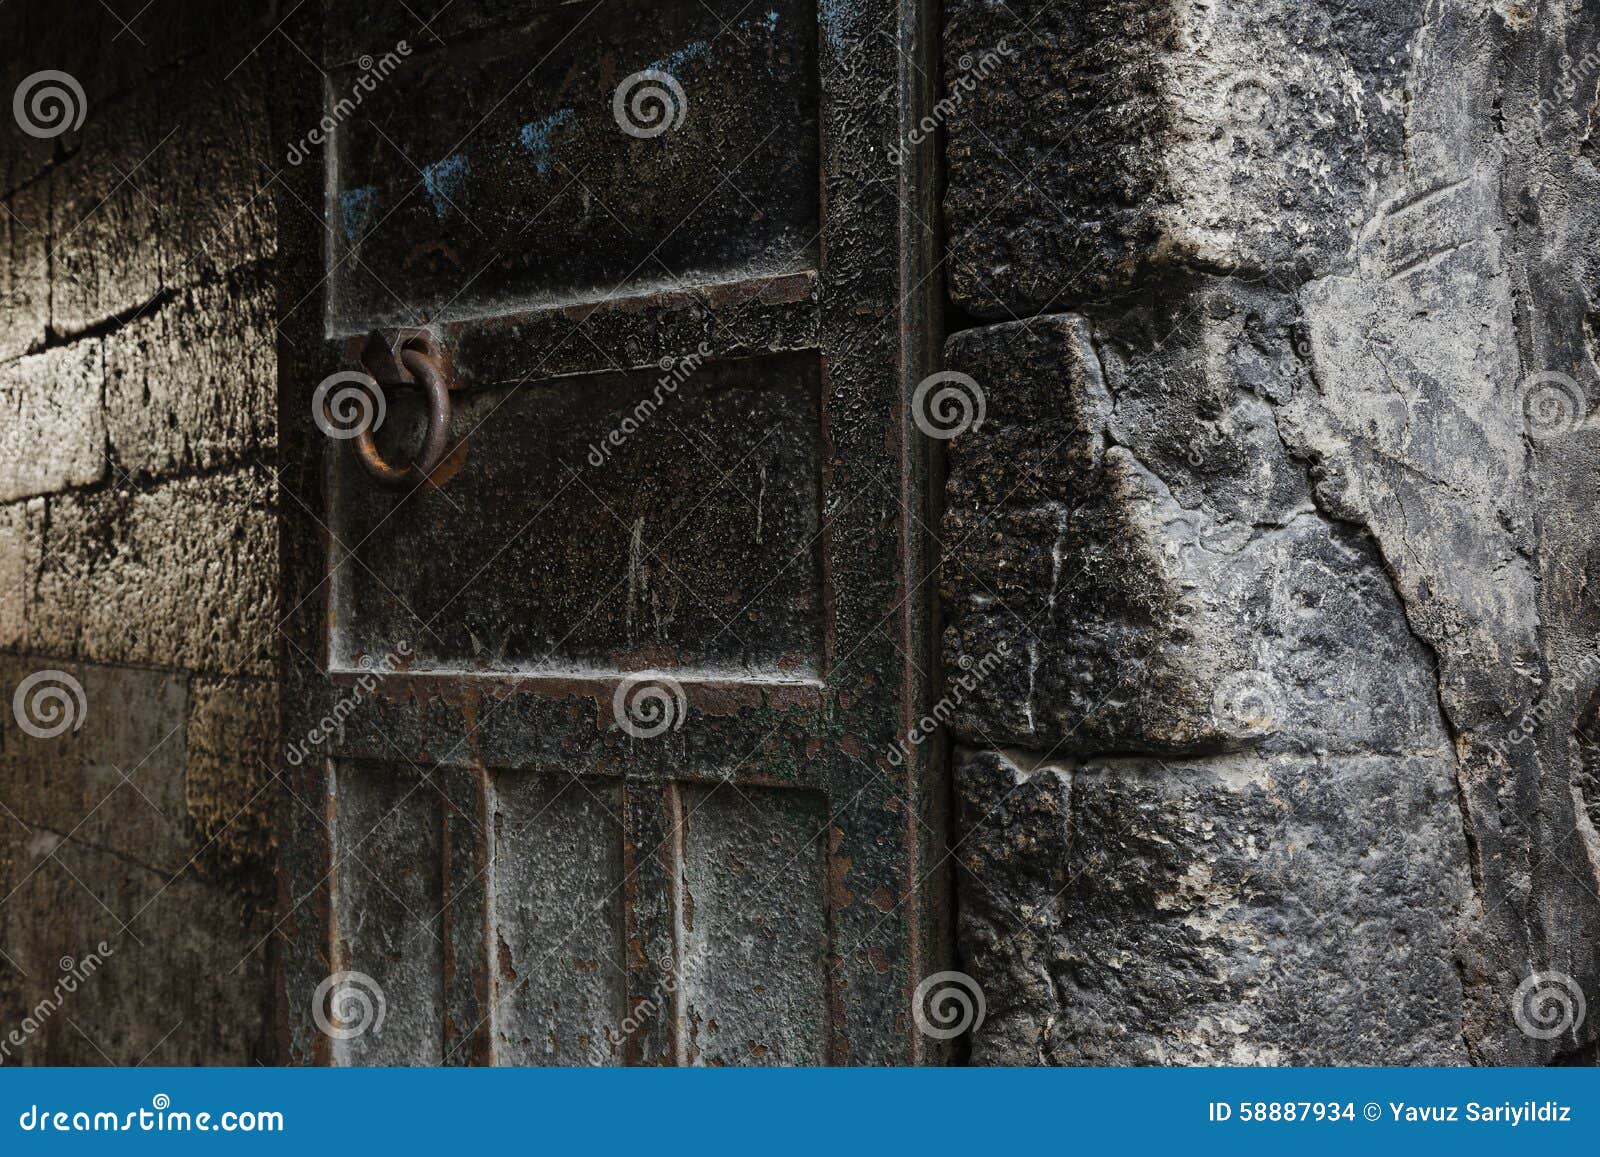 Rusty Metal and Stone Wall Backgrounds Stock Photo - Image of antique ...